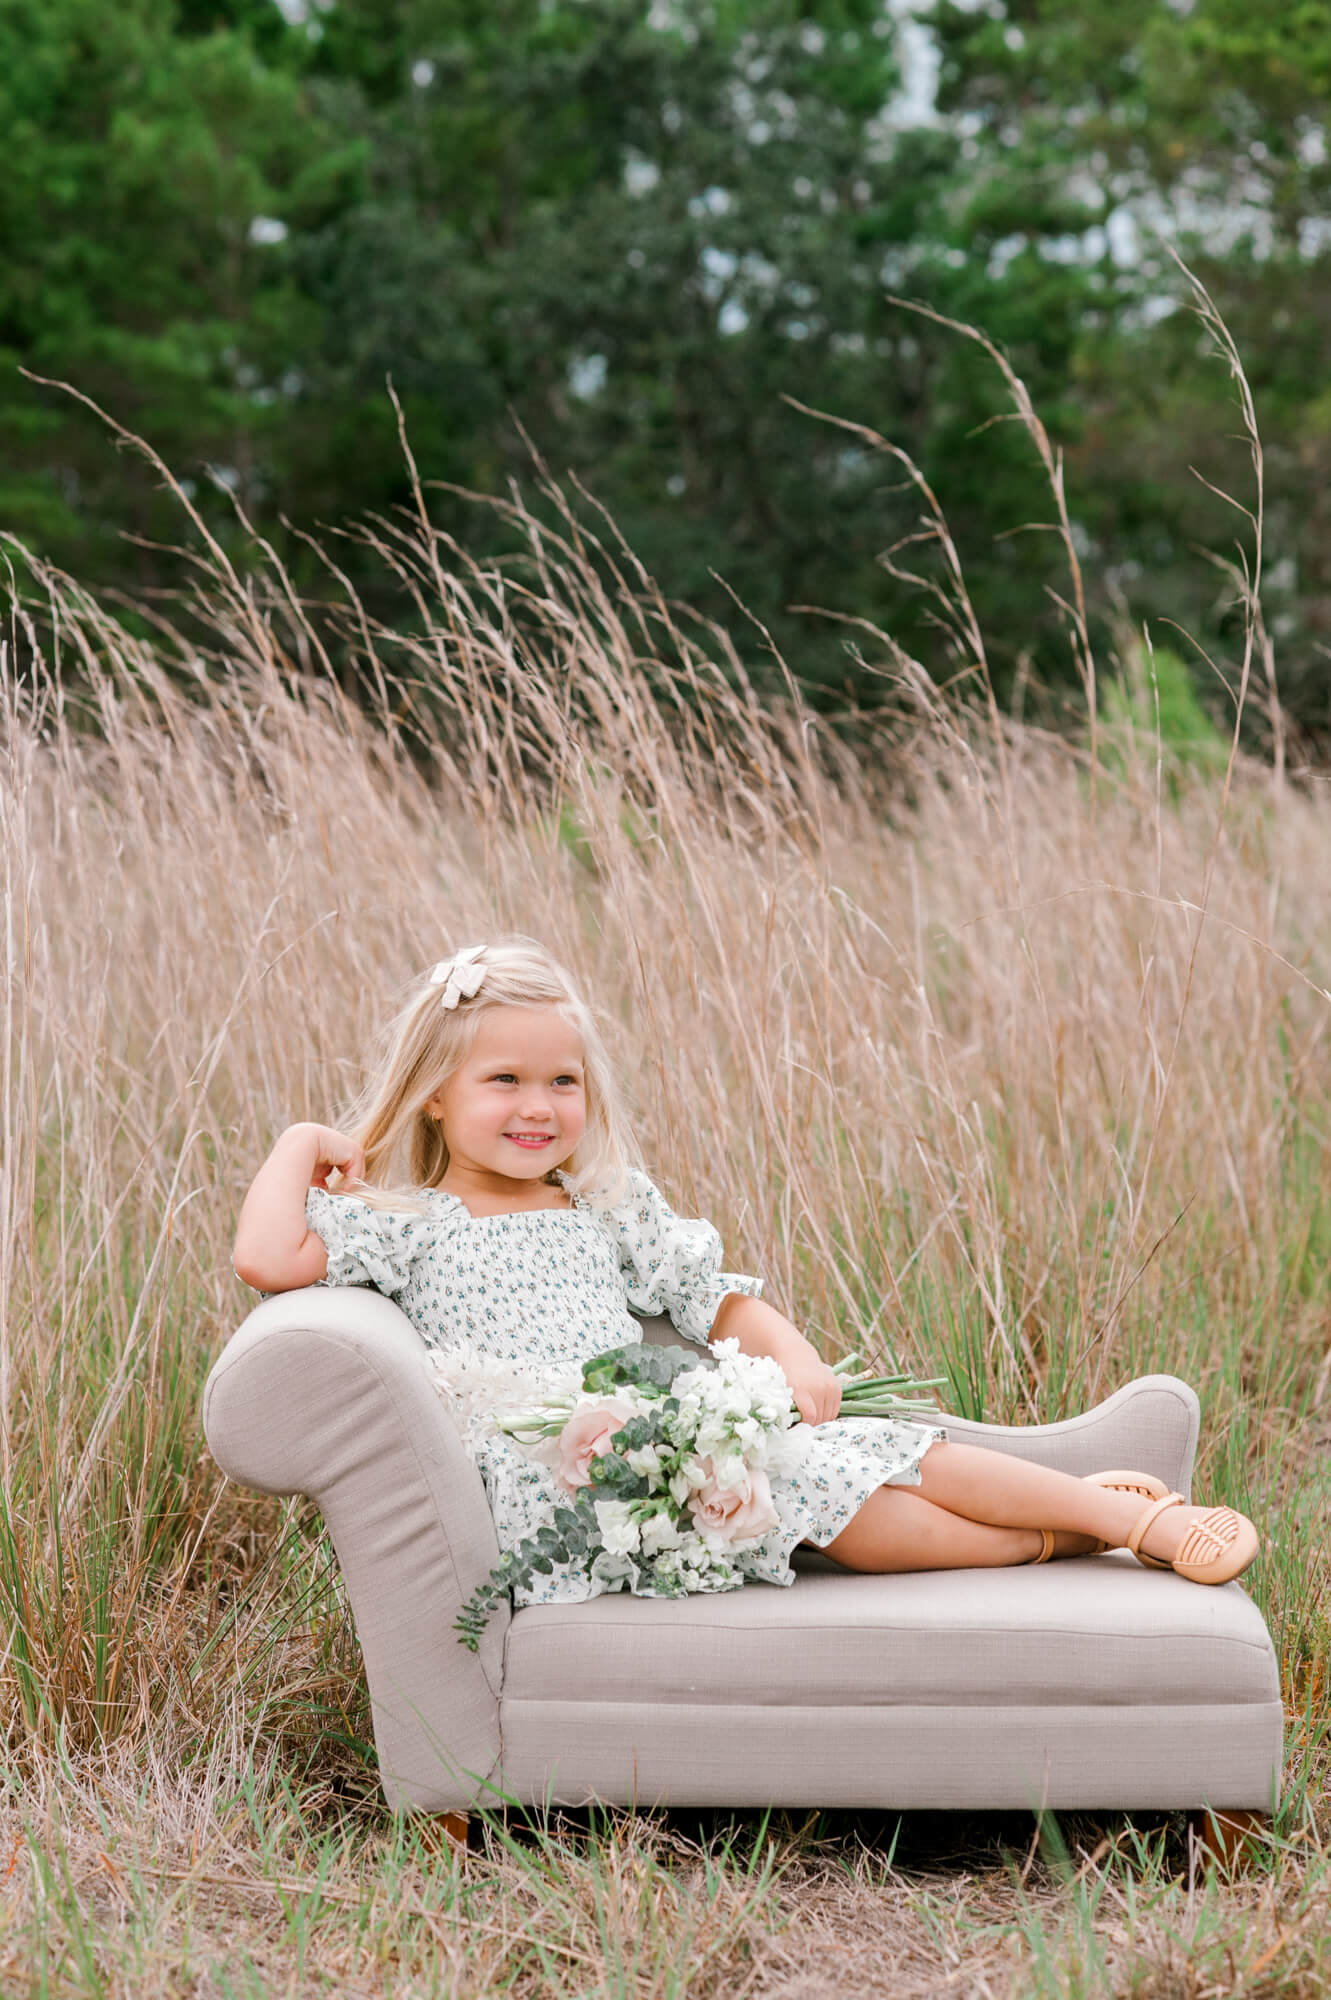 Young girl sitting on a miniature couch in a tall grass field at sunset holding a bouquet viera children's academy